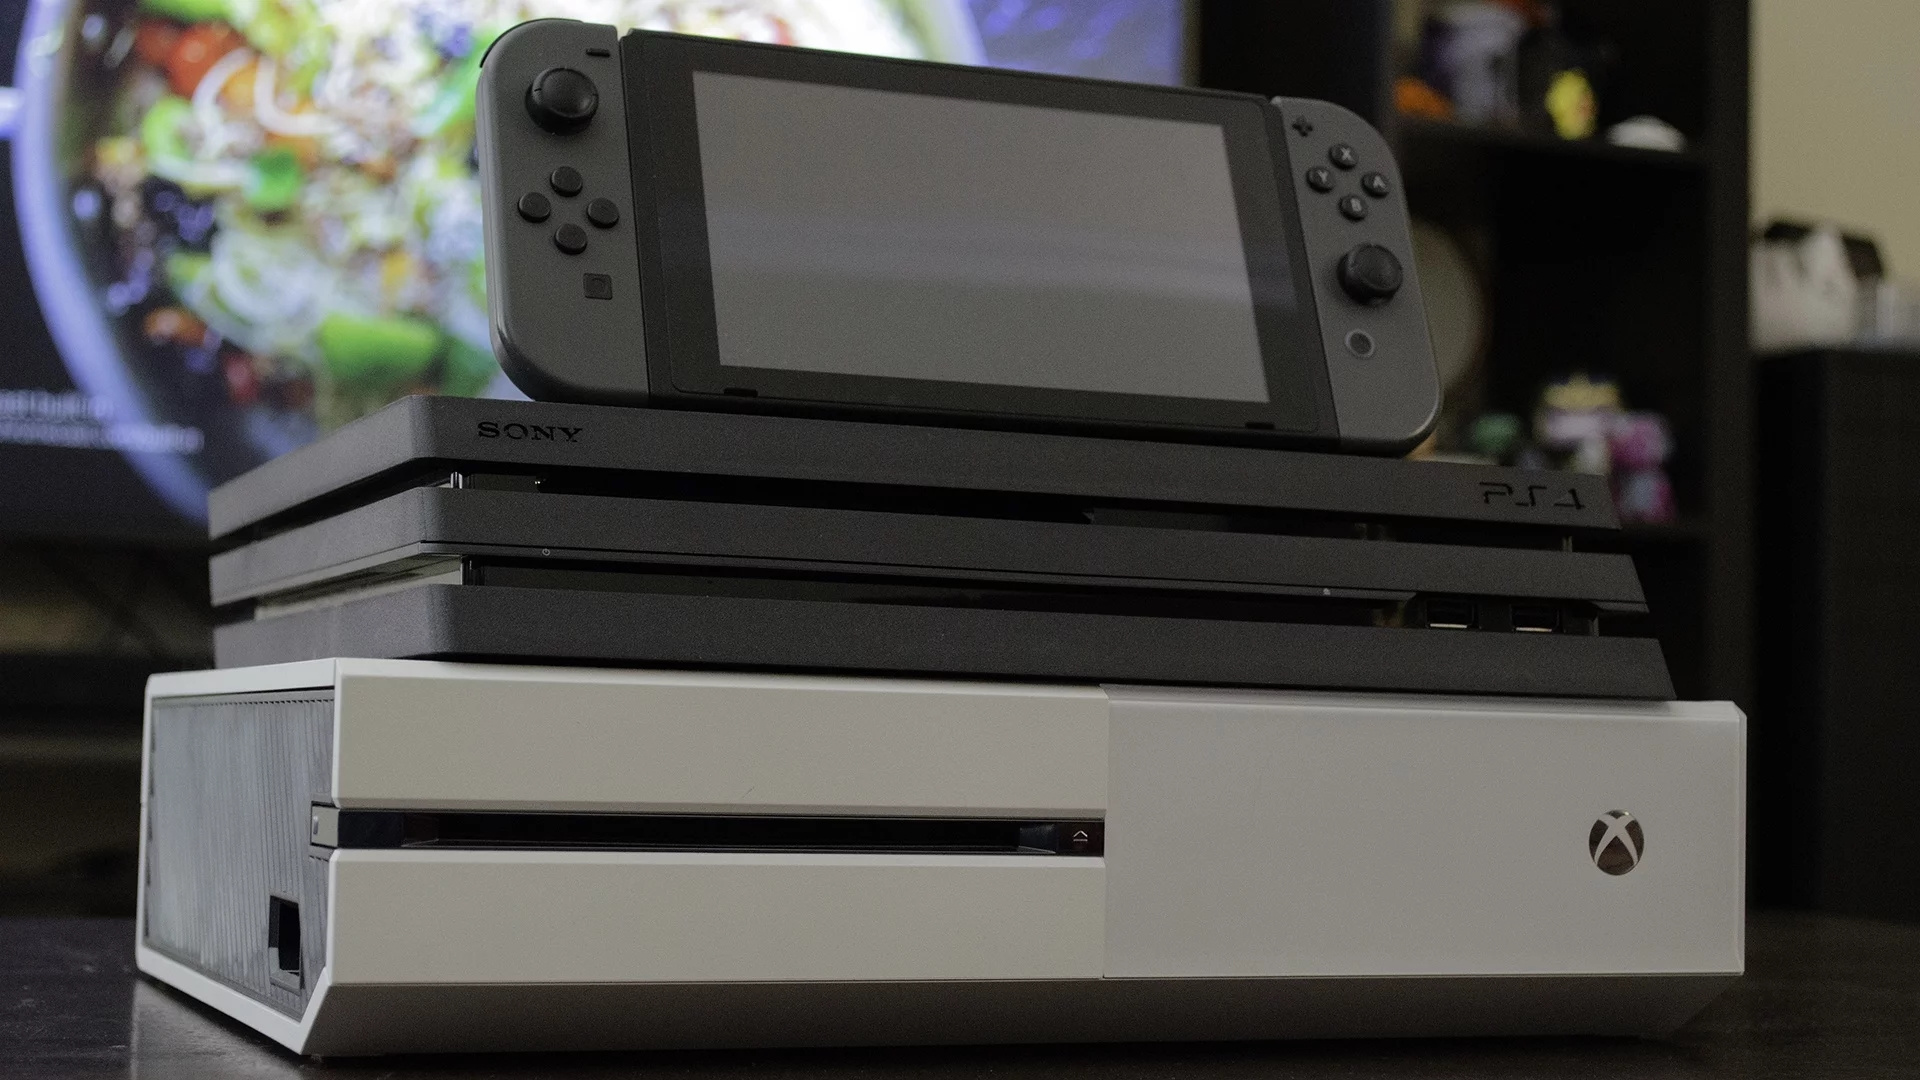 More Than 40 Of Switch Owners In The Us Have Another Video Game System Nintendo Life